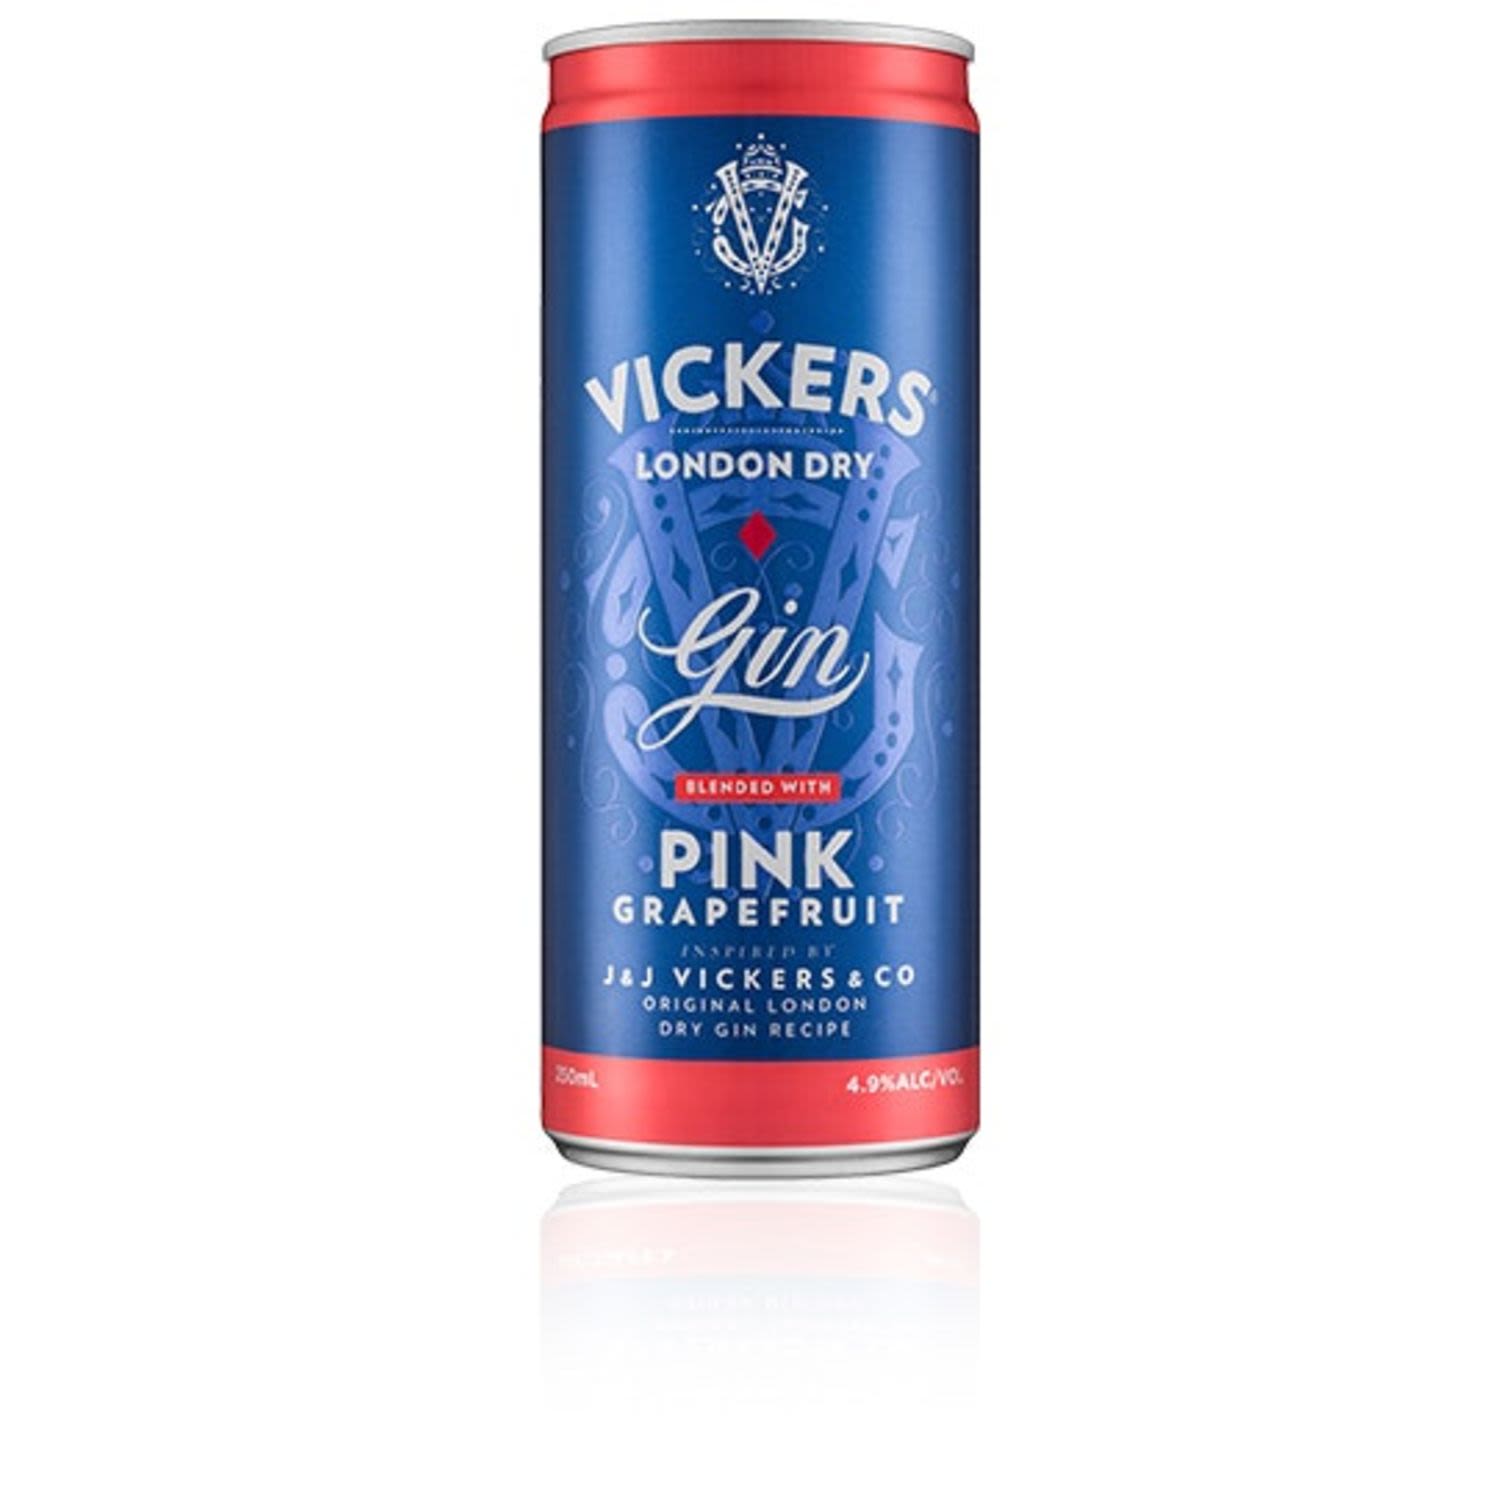 Vickers London Dry Gin distilled to crystal clarity and blended with zesty pink grapefruit and soda water.<br /> <br />Alcohol Volume: 4.90%<br /><br />Pack Format: 24 Pack<br /><br />Standard Drinks: 1</br /><br />Pack Type: Can<br />